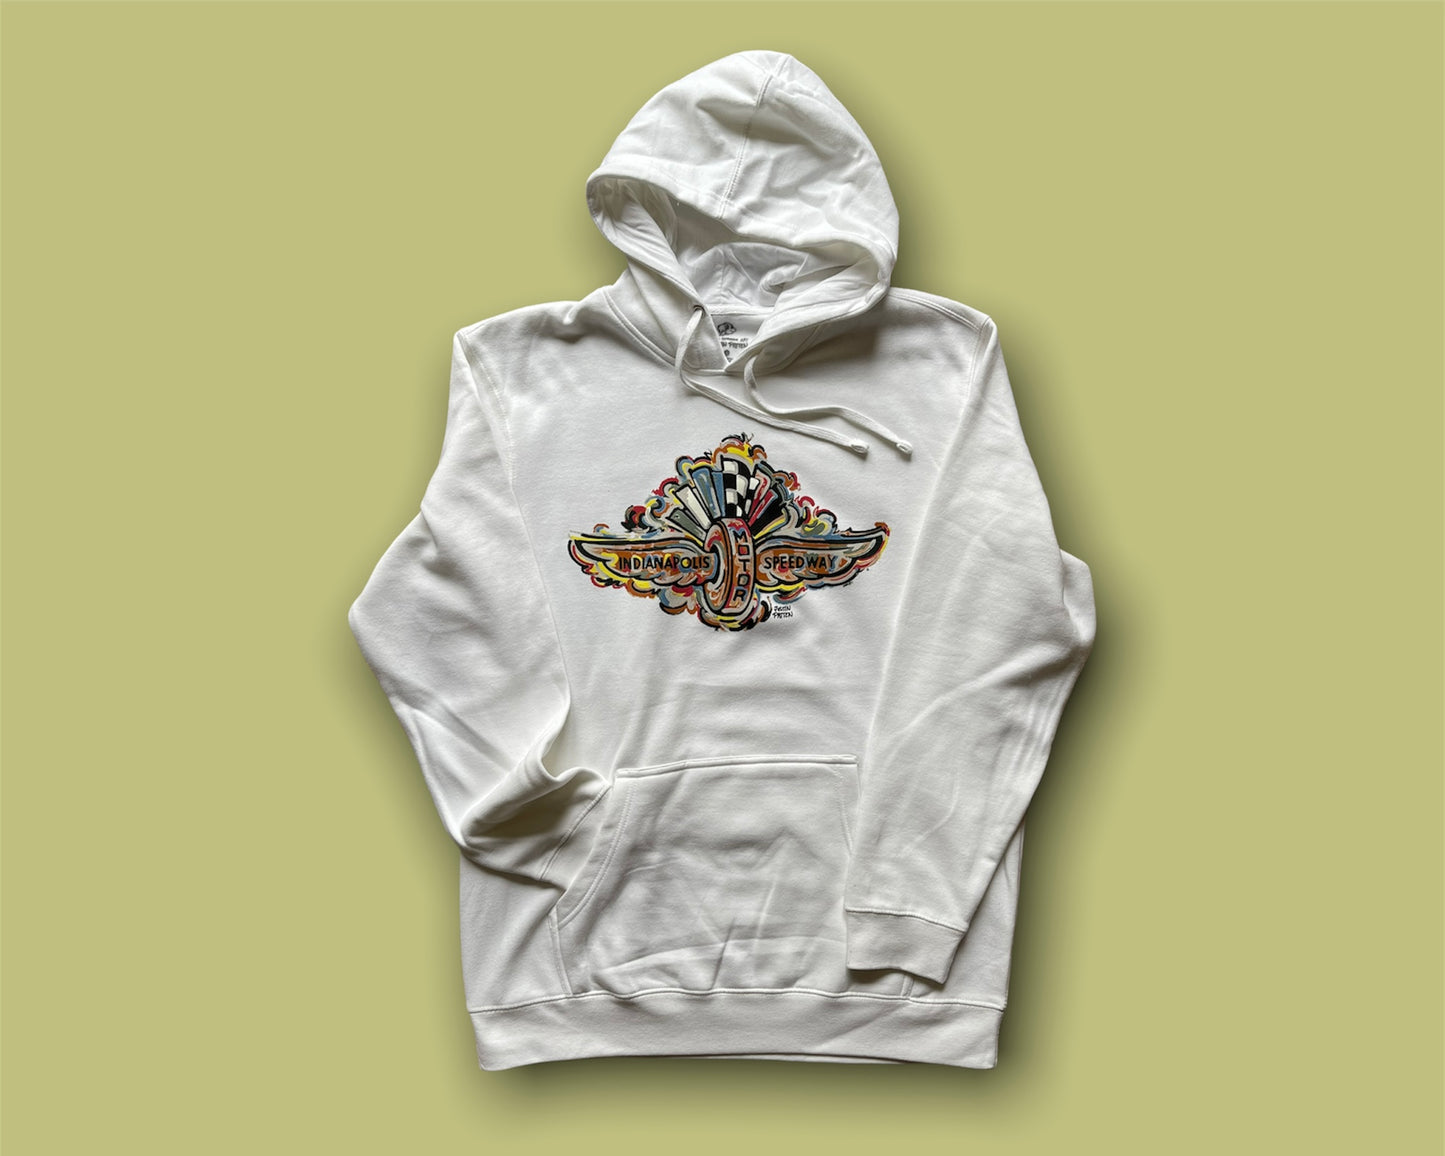 Indianapolis Motor Speedway Wing and Wheel White Unisex Hoodie by Justin Patten